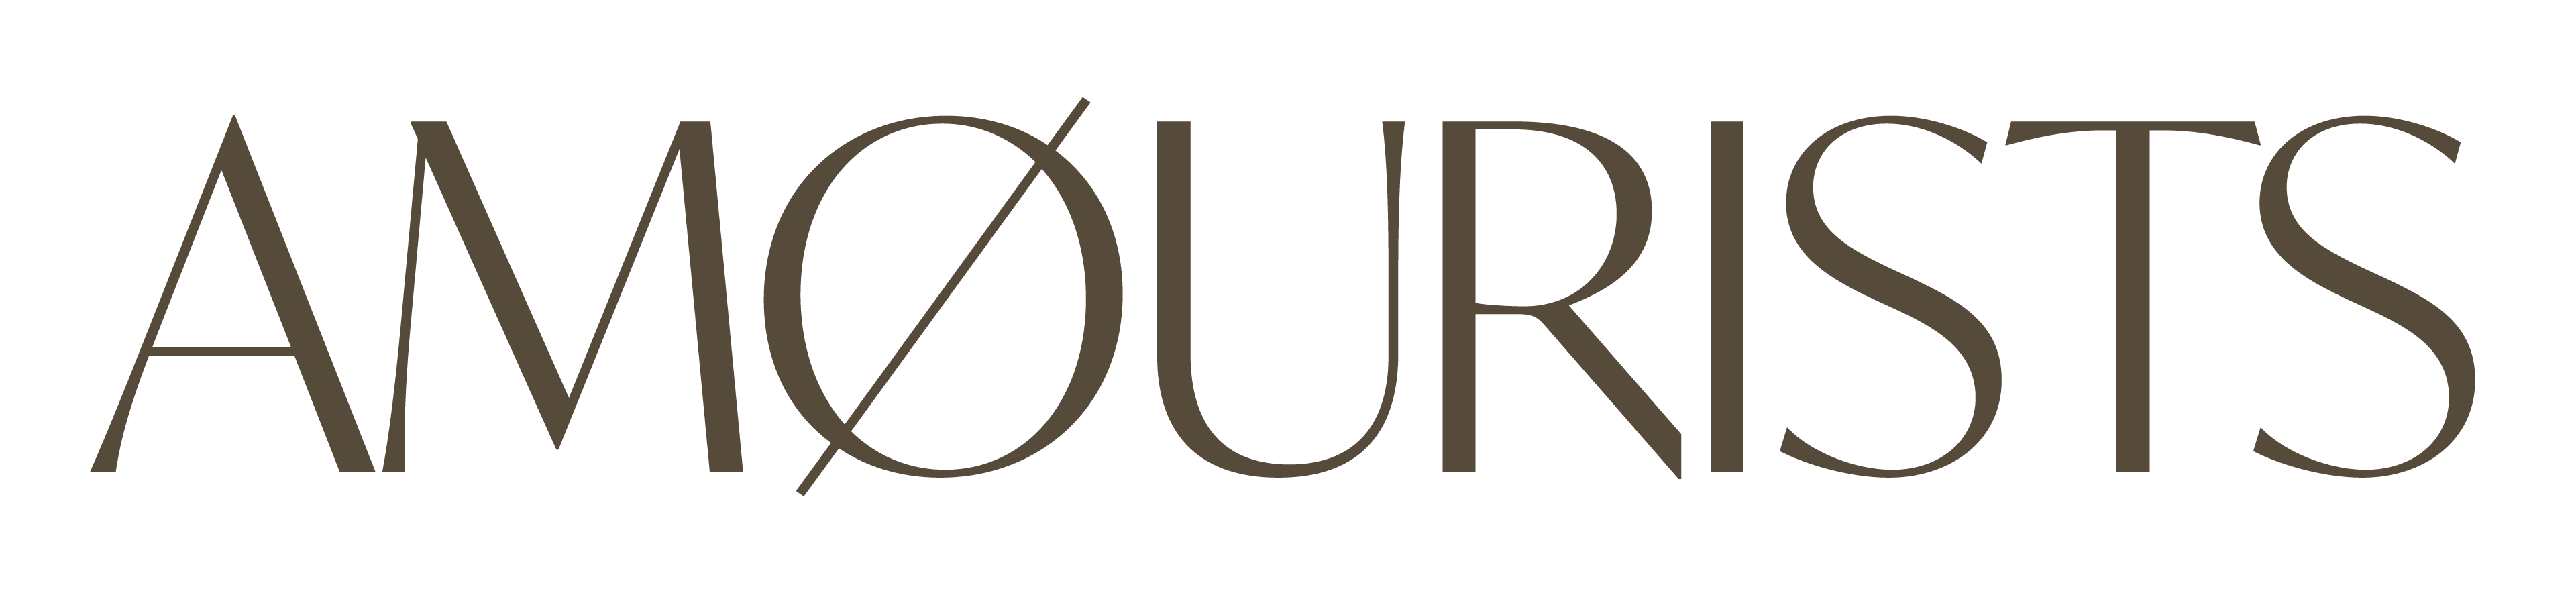 Amourists logo. Symbolizing elegance and sophistication, our logo represents our premier online jewelry brand based in Dublin, Ireland. Explore our stylish and durable accessories, including Gold plated Pearl Medium Drop Hoop Earrings, packaged in eco-friendly materials and waterproof for lasting beauty.